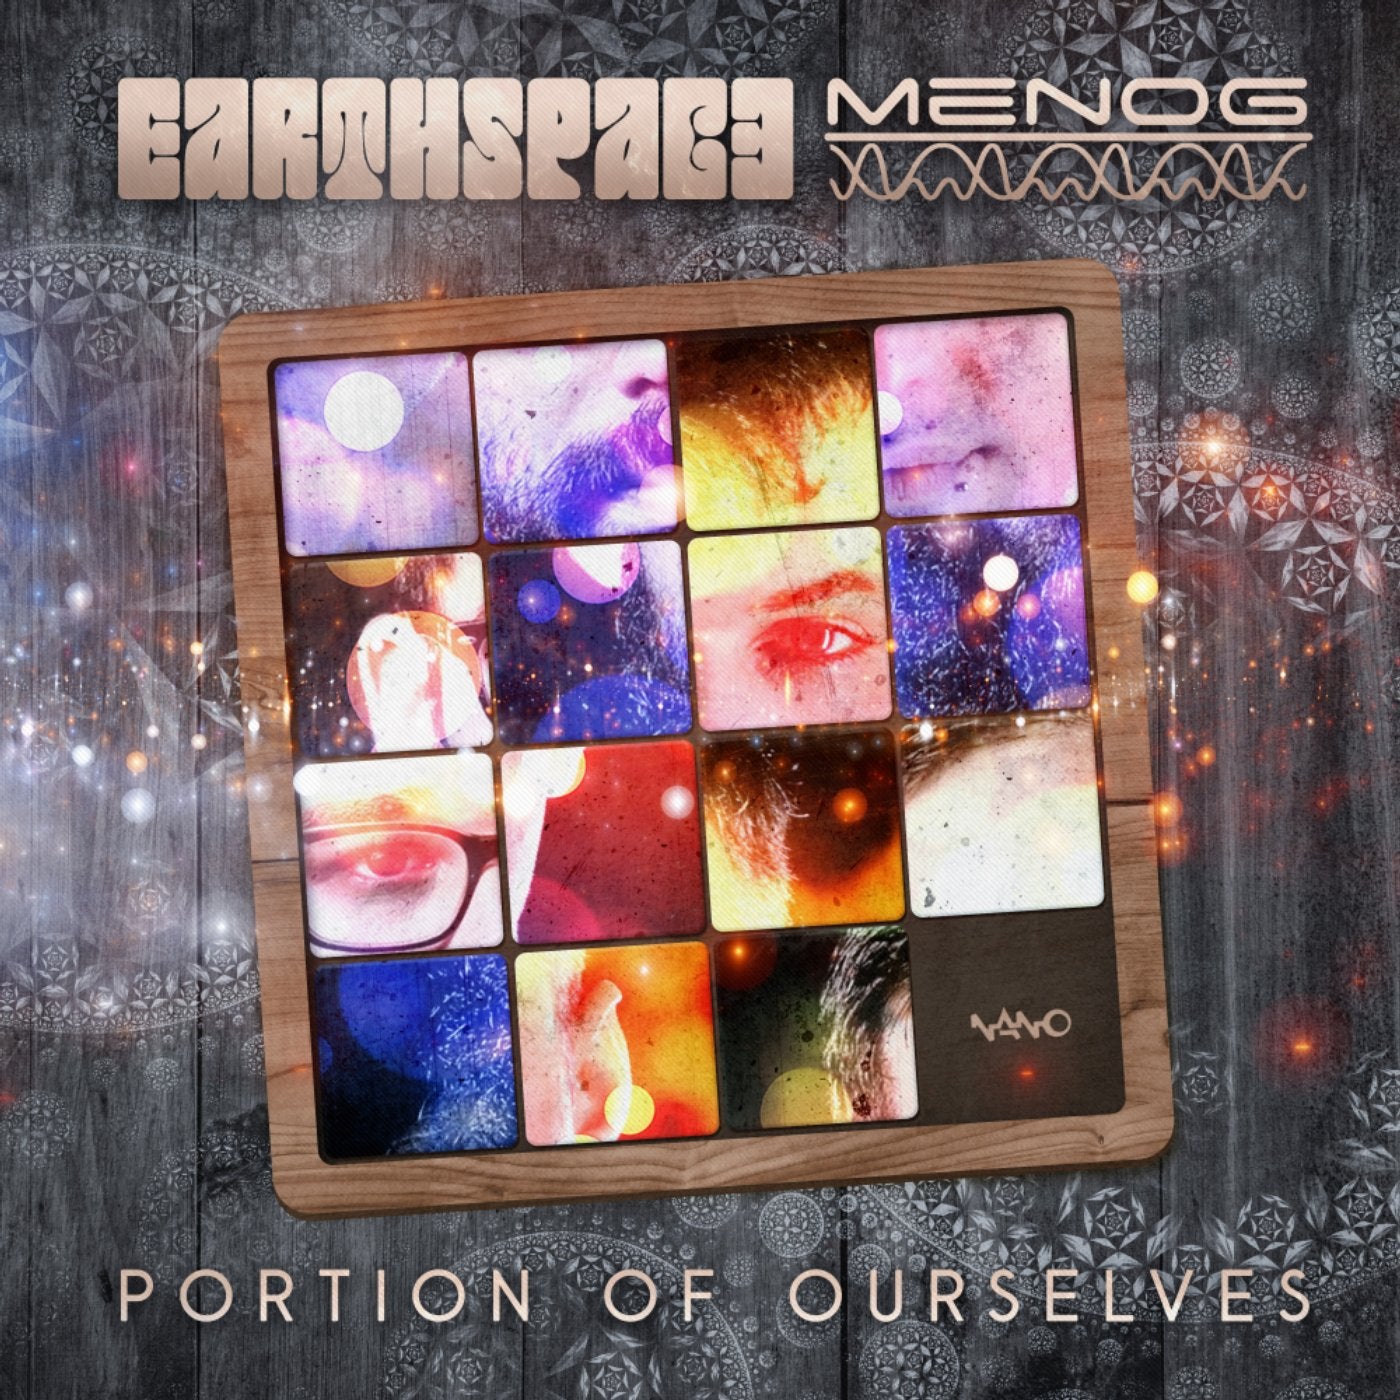 Portion of Ourselves